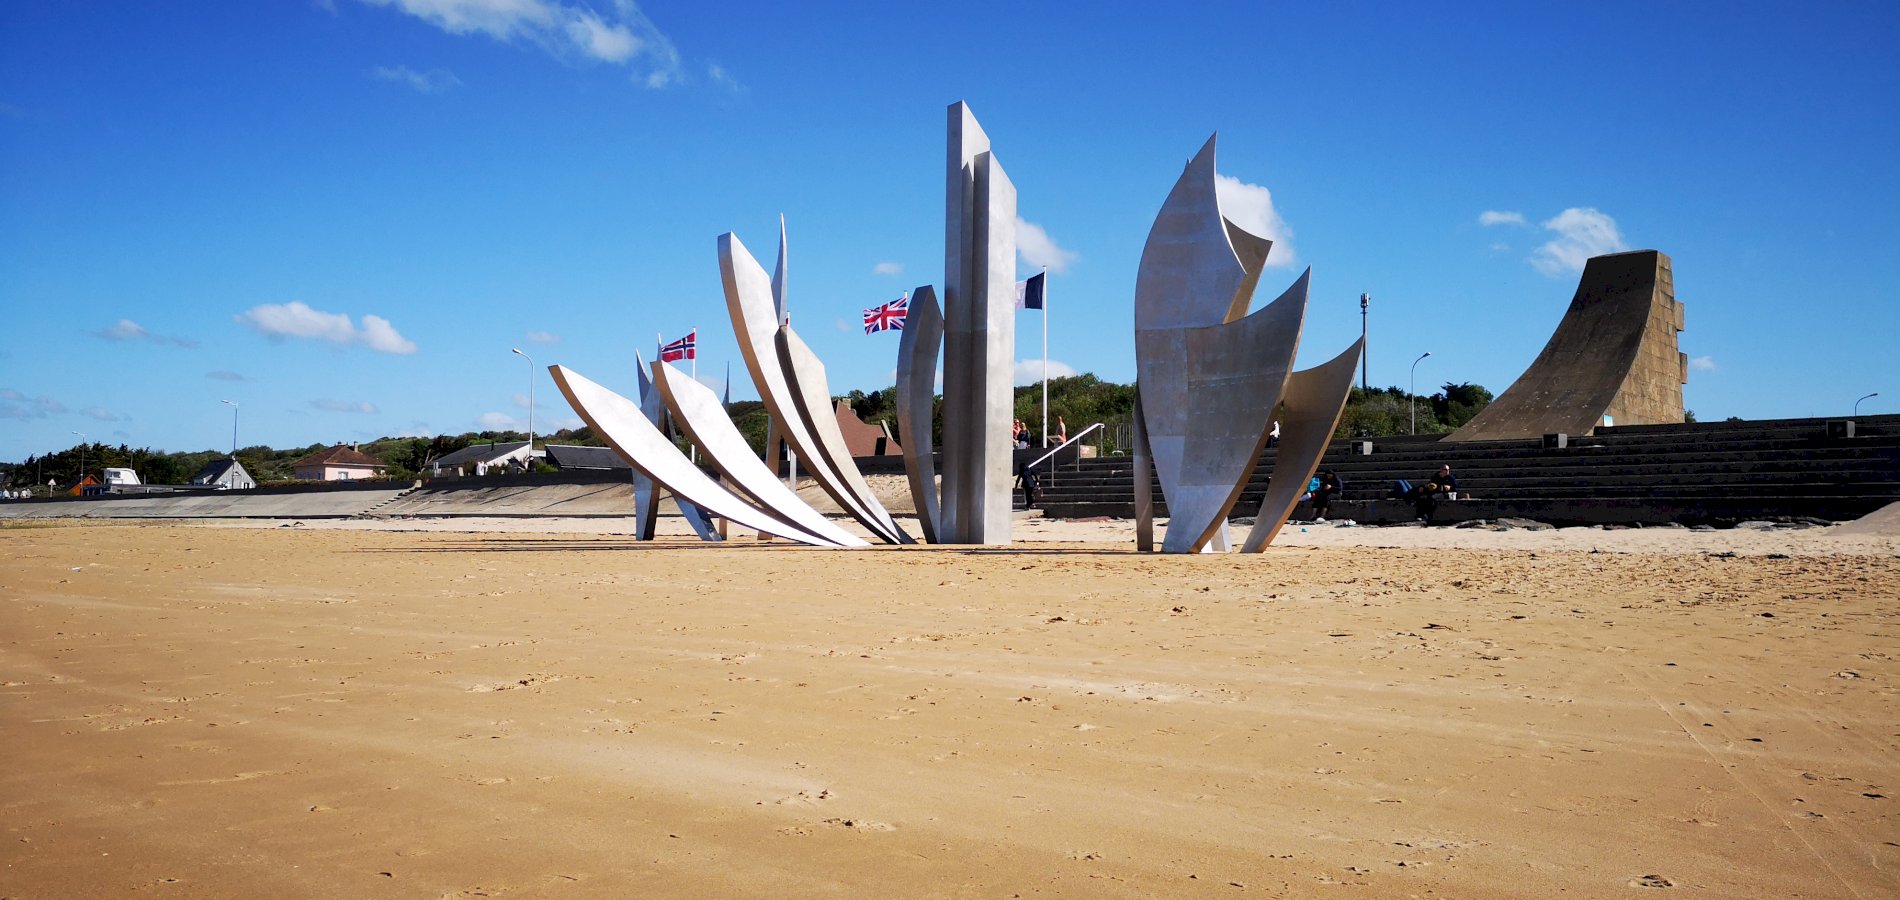 Ophorus Tours - A Private Shore Excursion from Le Havre to Normandy D-DAY Landing Beaches